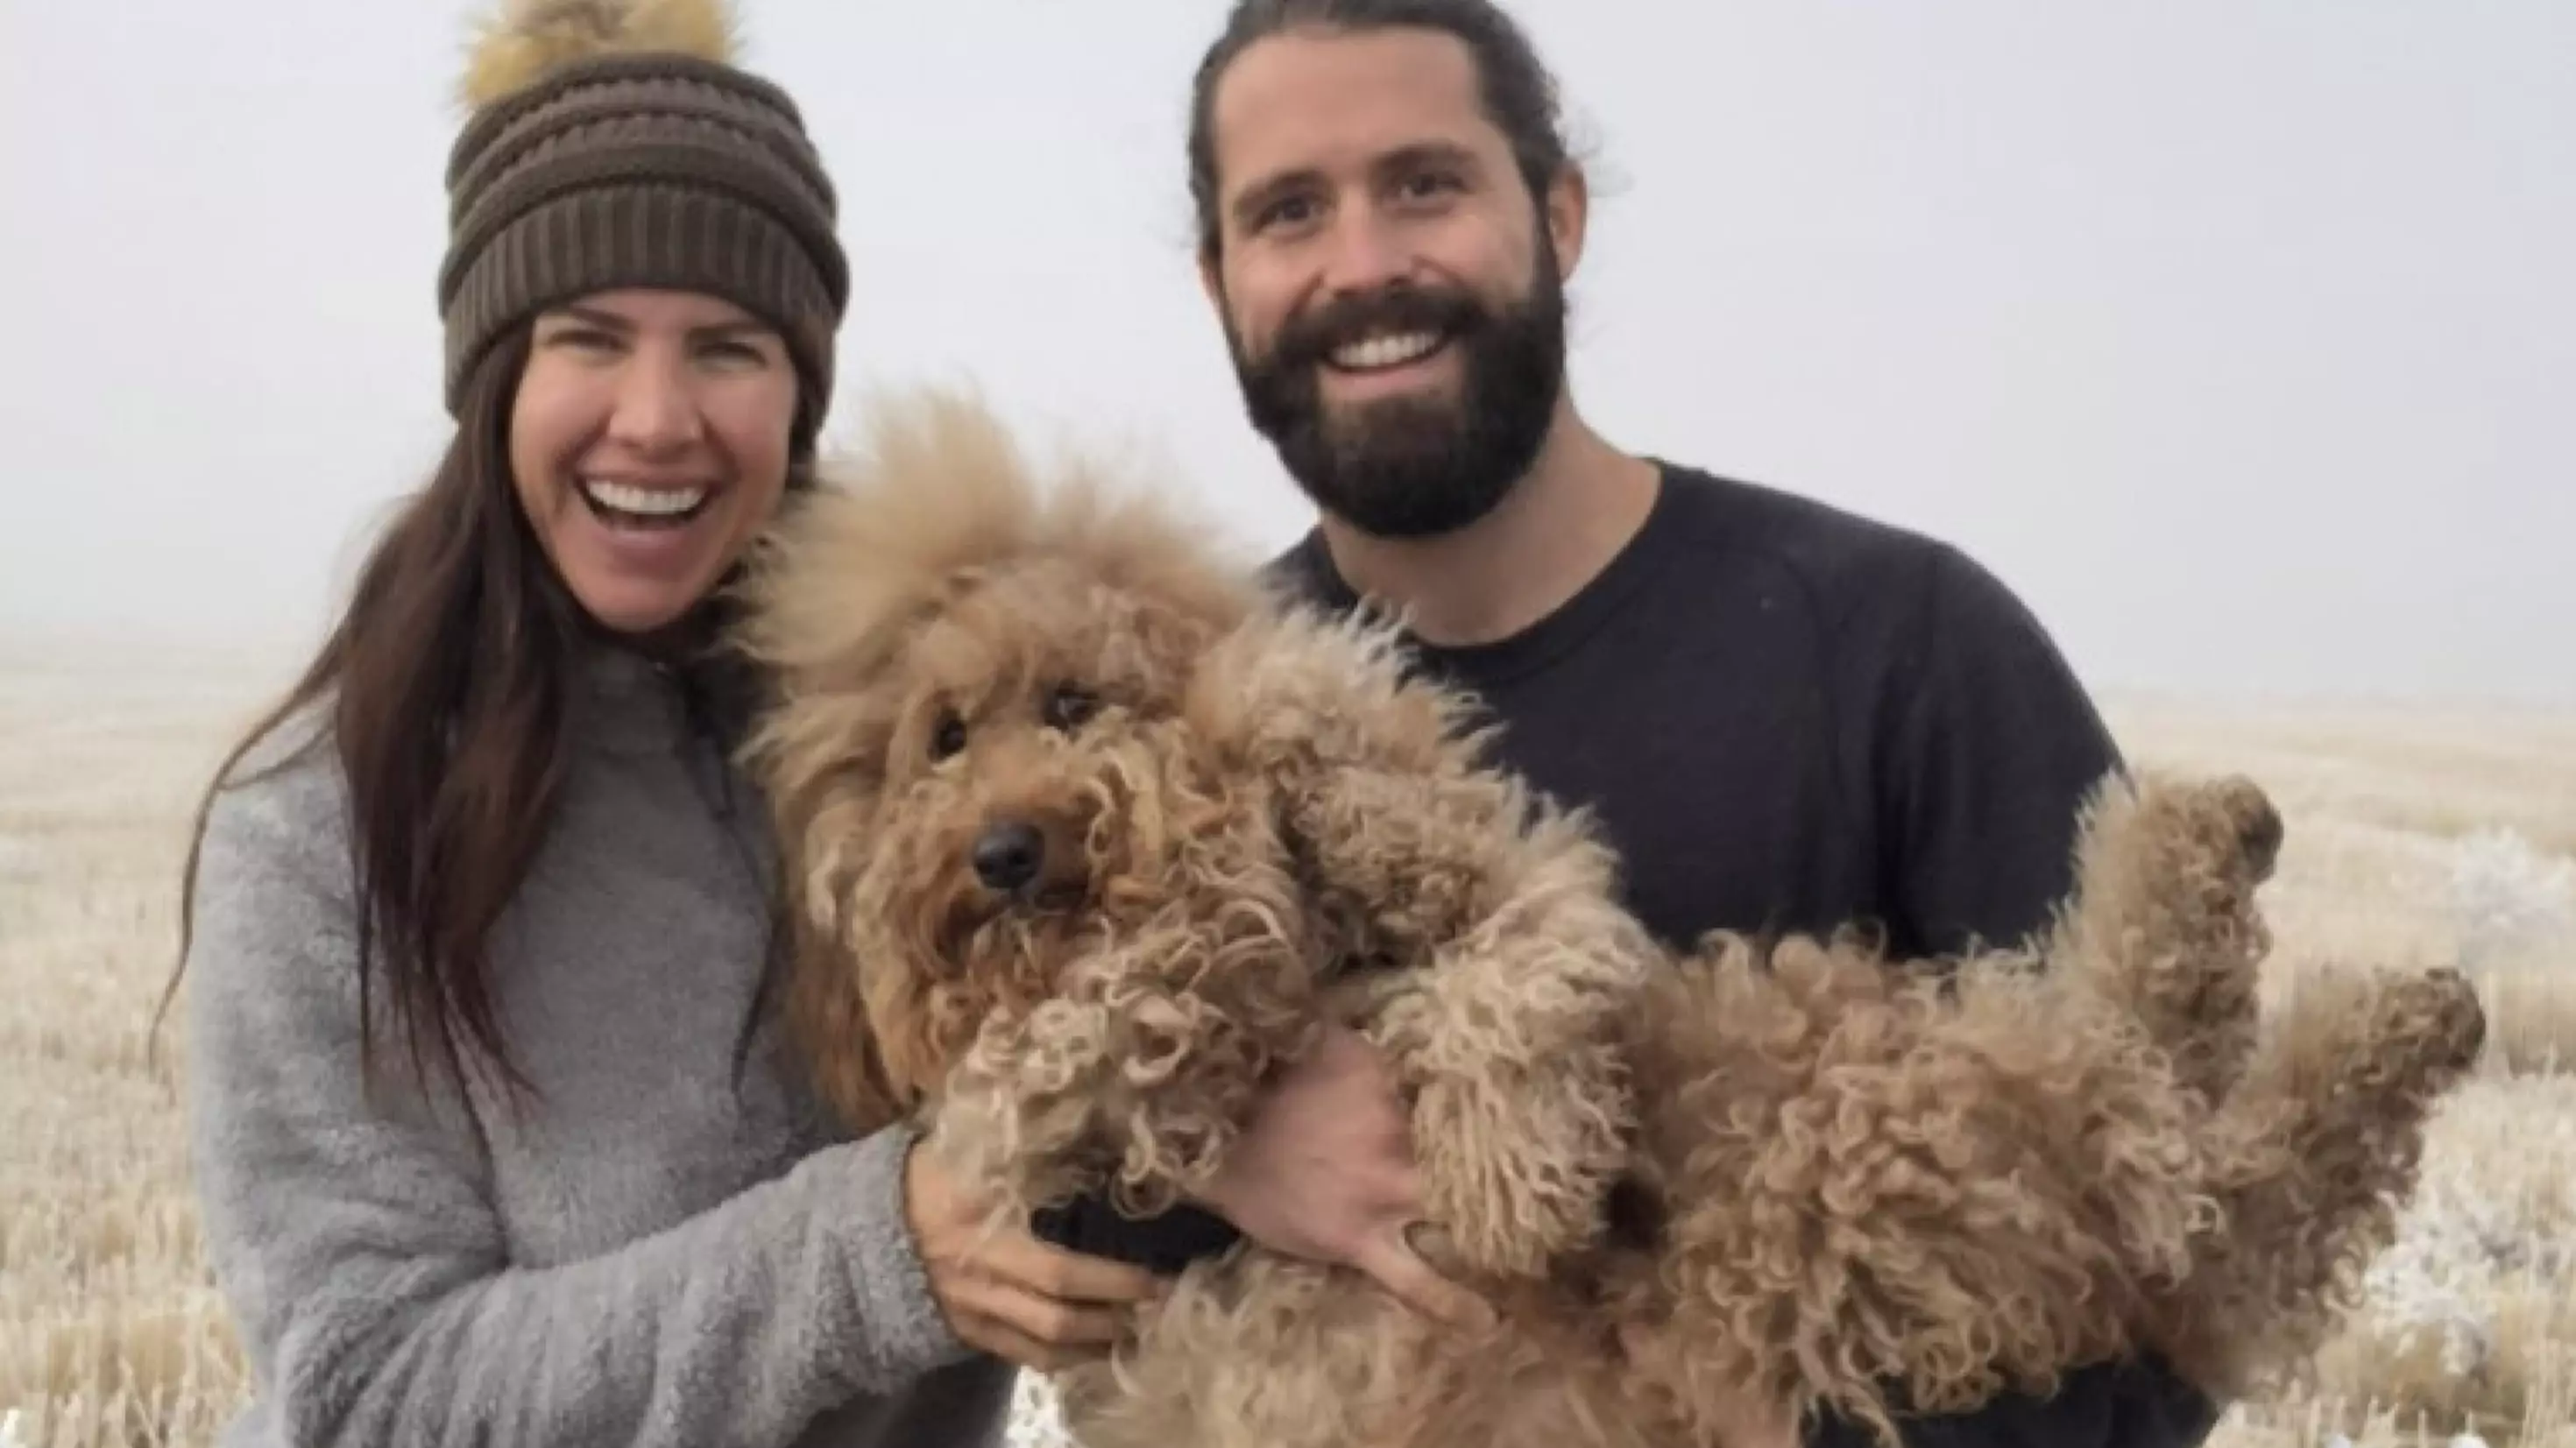 Disabled Goldendoodle With 'Wobbly Animal Syndrome' Enjoys Camping, Hiking and Trekking